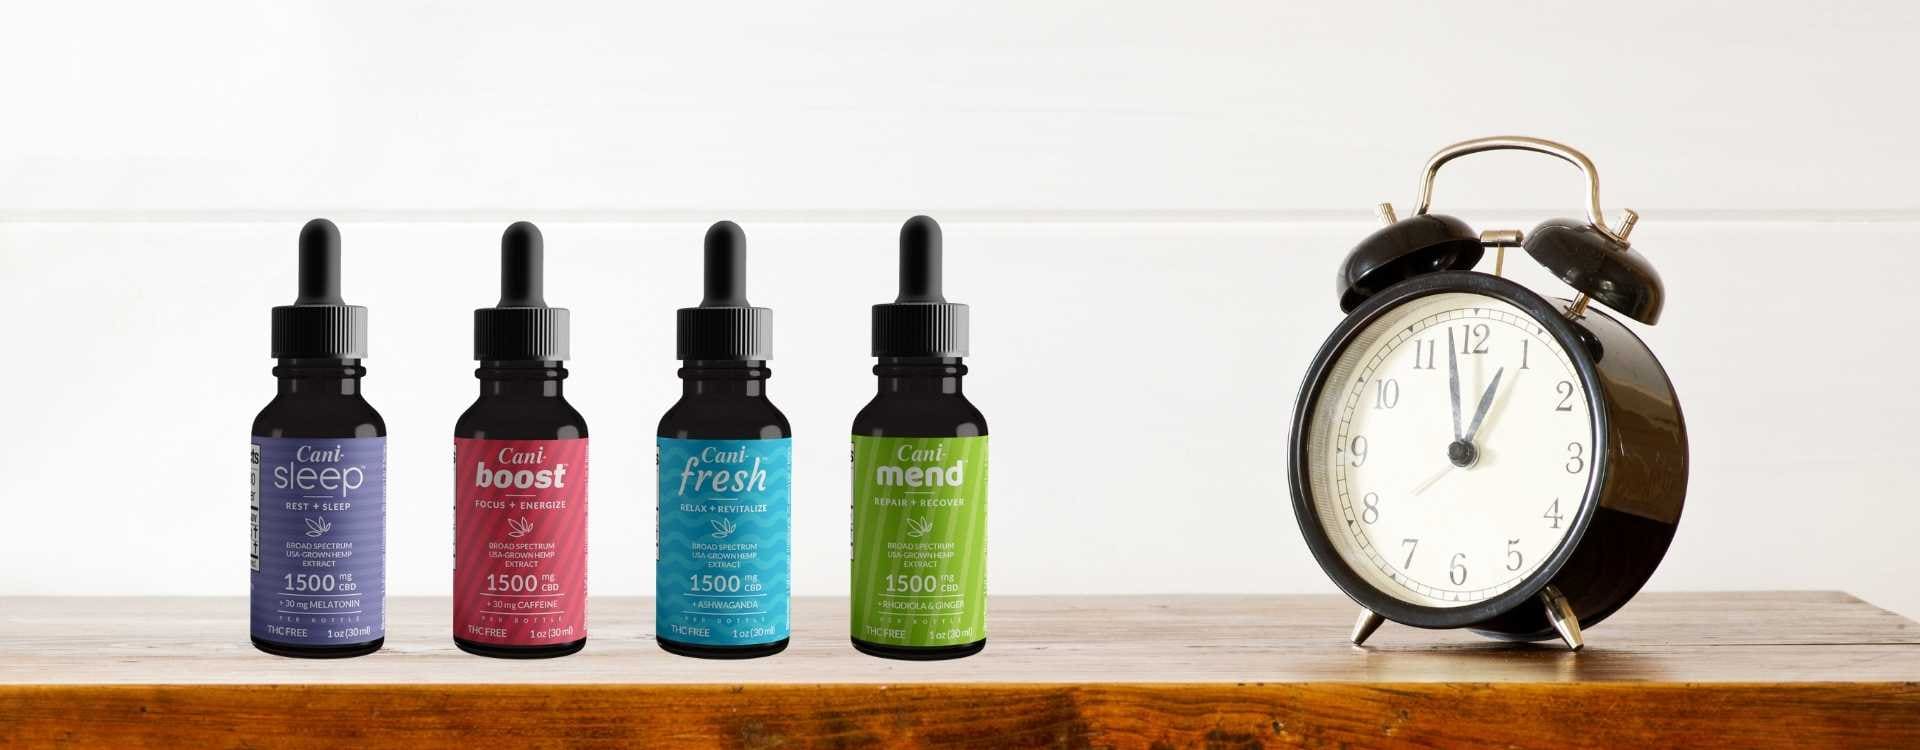 Four CBD oil tinctures next to a black alarm clock placed on a wooden table